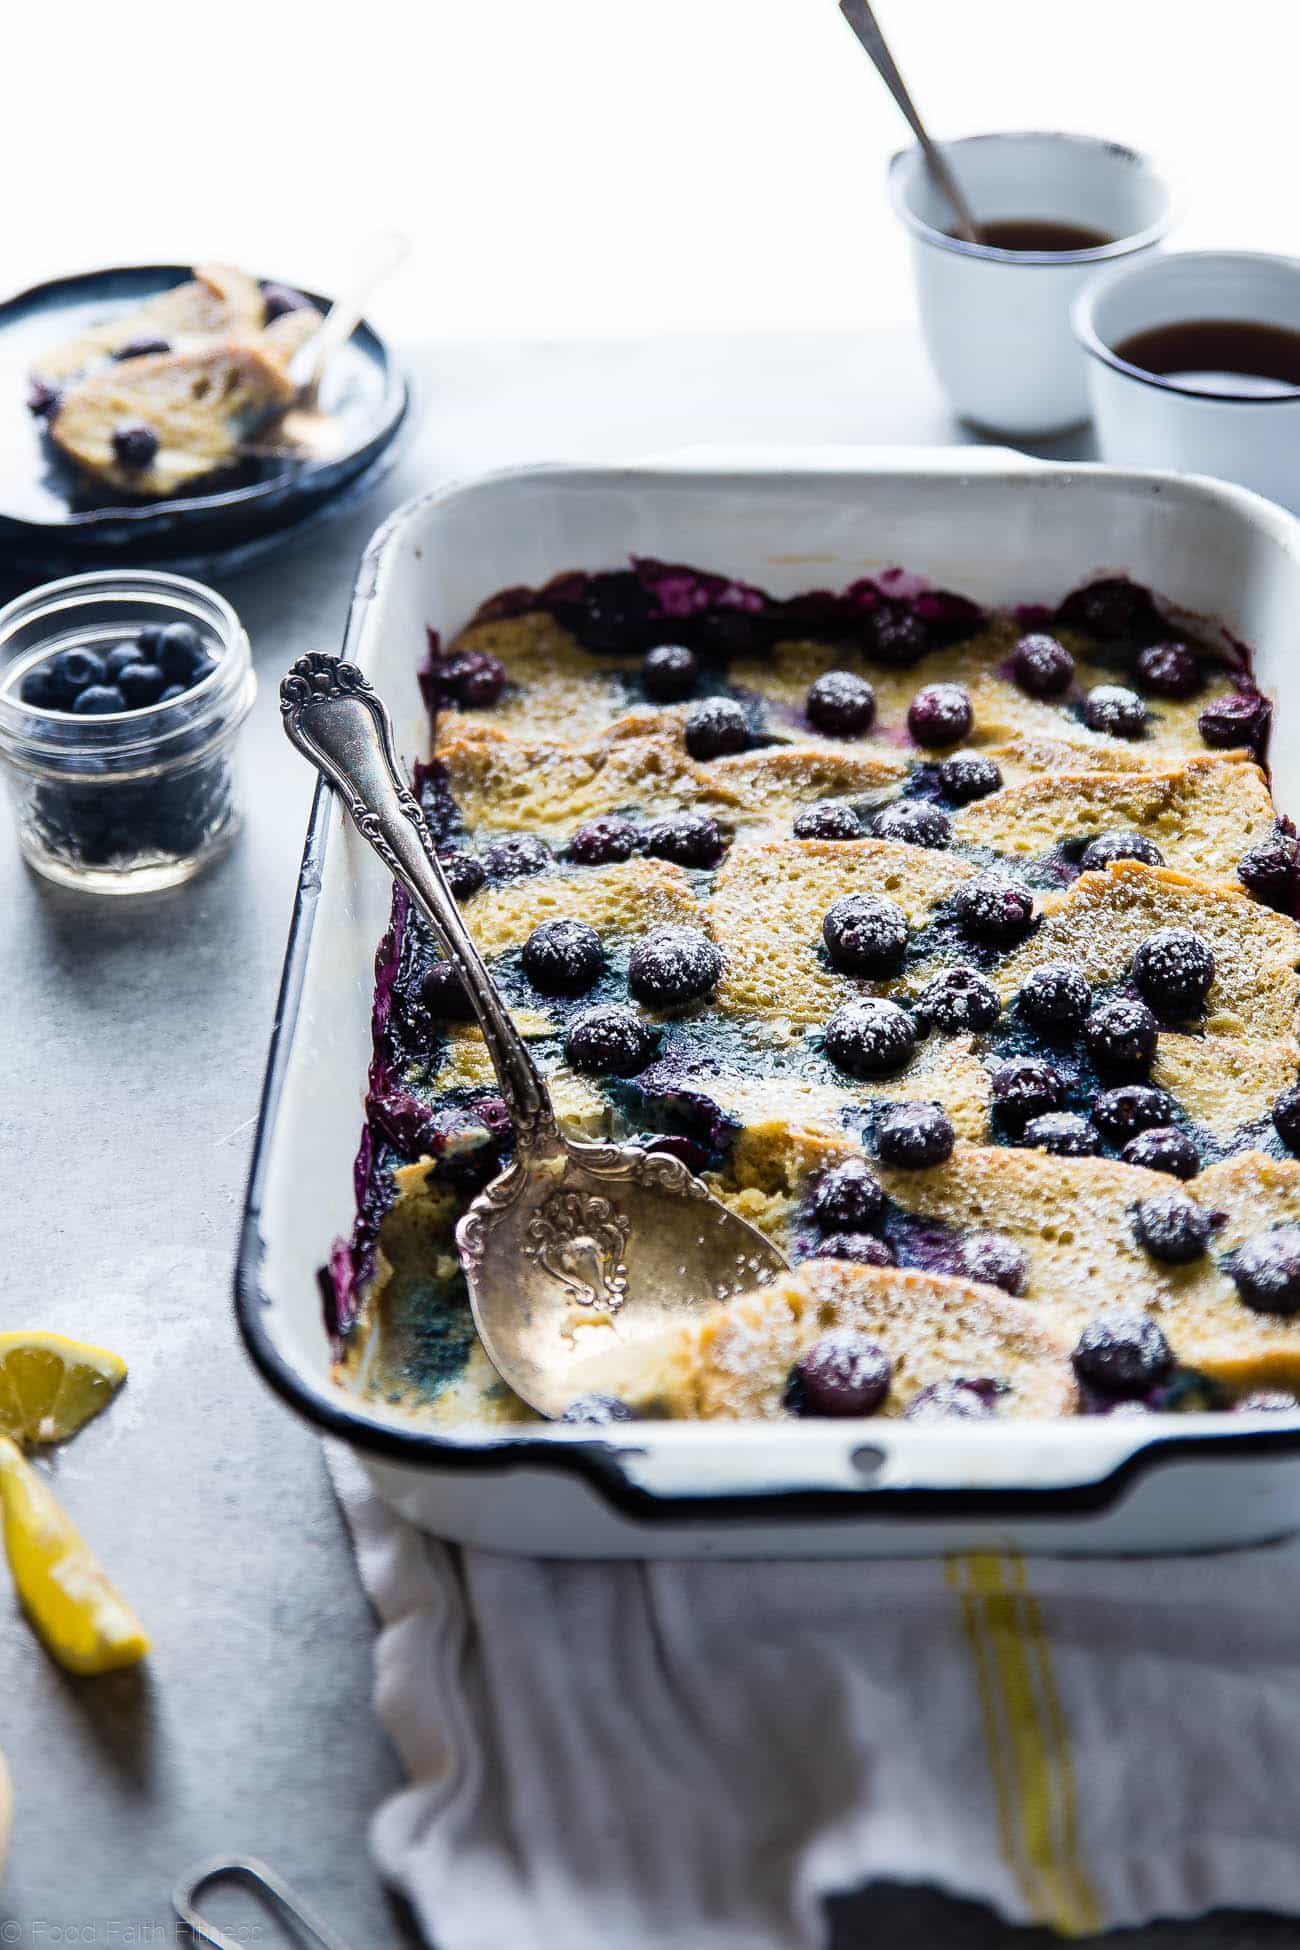 Gluten Free Lemon Blueberry Muffin Breakfast Casserole - This muffin gluten free breakfast casserole is a creative way to use your muffins, and is only 5 ingredients and 200 calories! Perfect for spring brunch or Mother's Day! | Foodfaithfitness.com | @FoodFaithFit